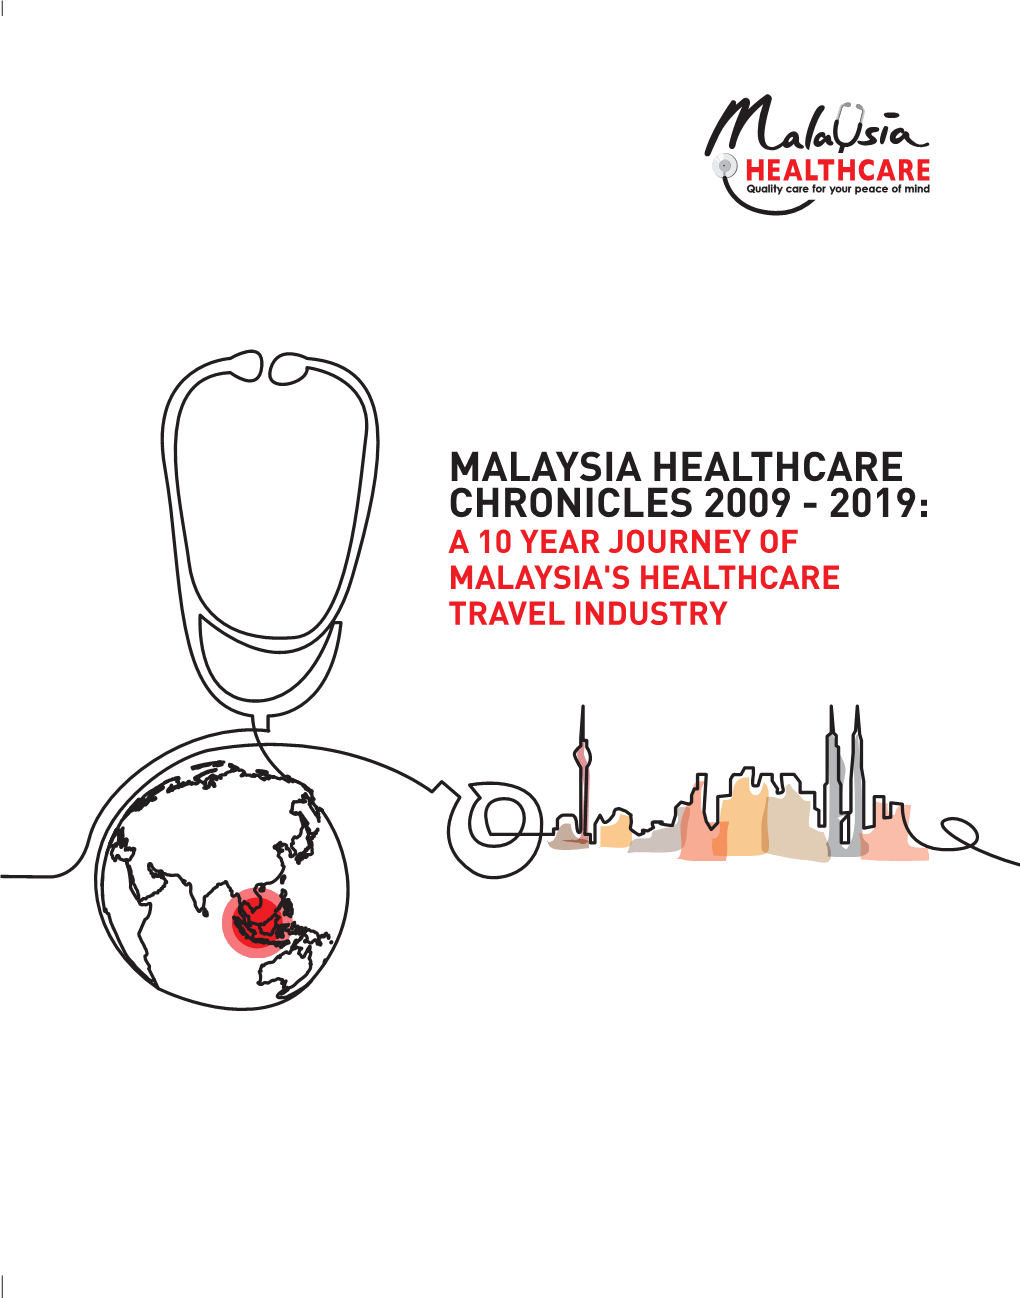 Malaysia Healthcare Chronicles 2009 - 2019: a 10 Year Journey of Malaysia's Healthcare Travel Industry